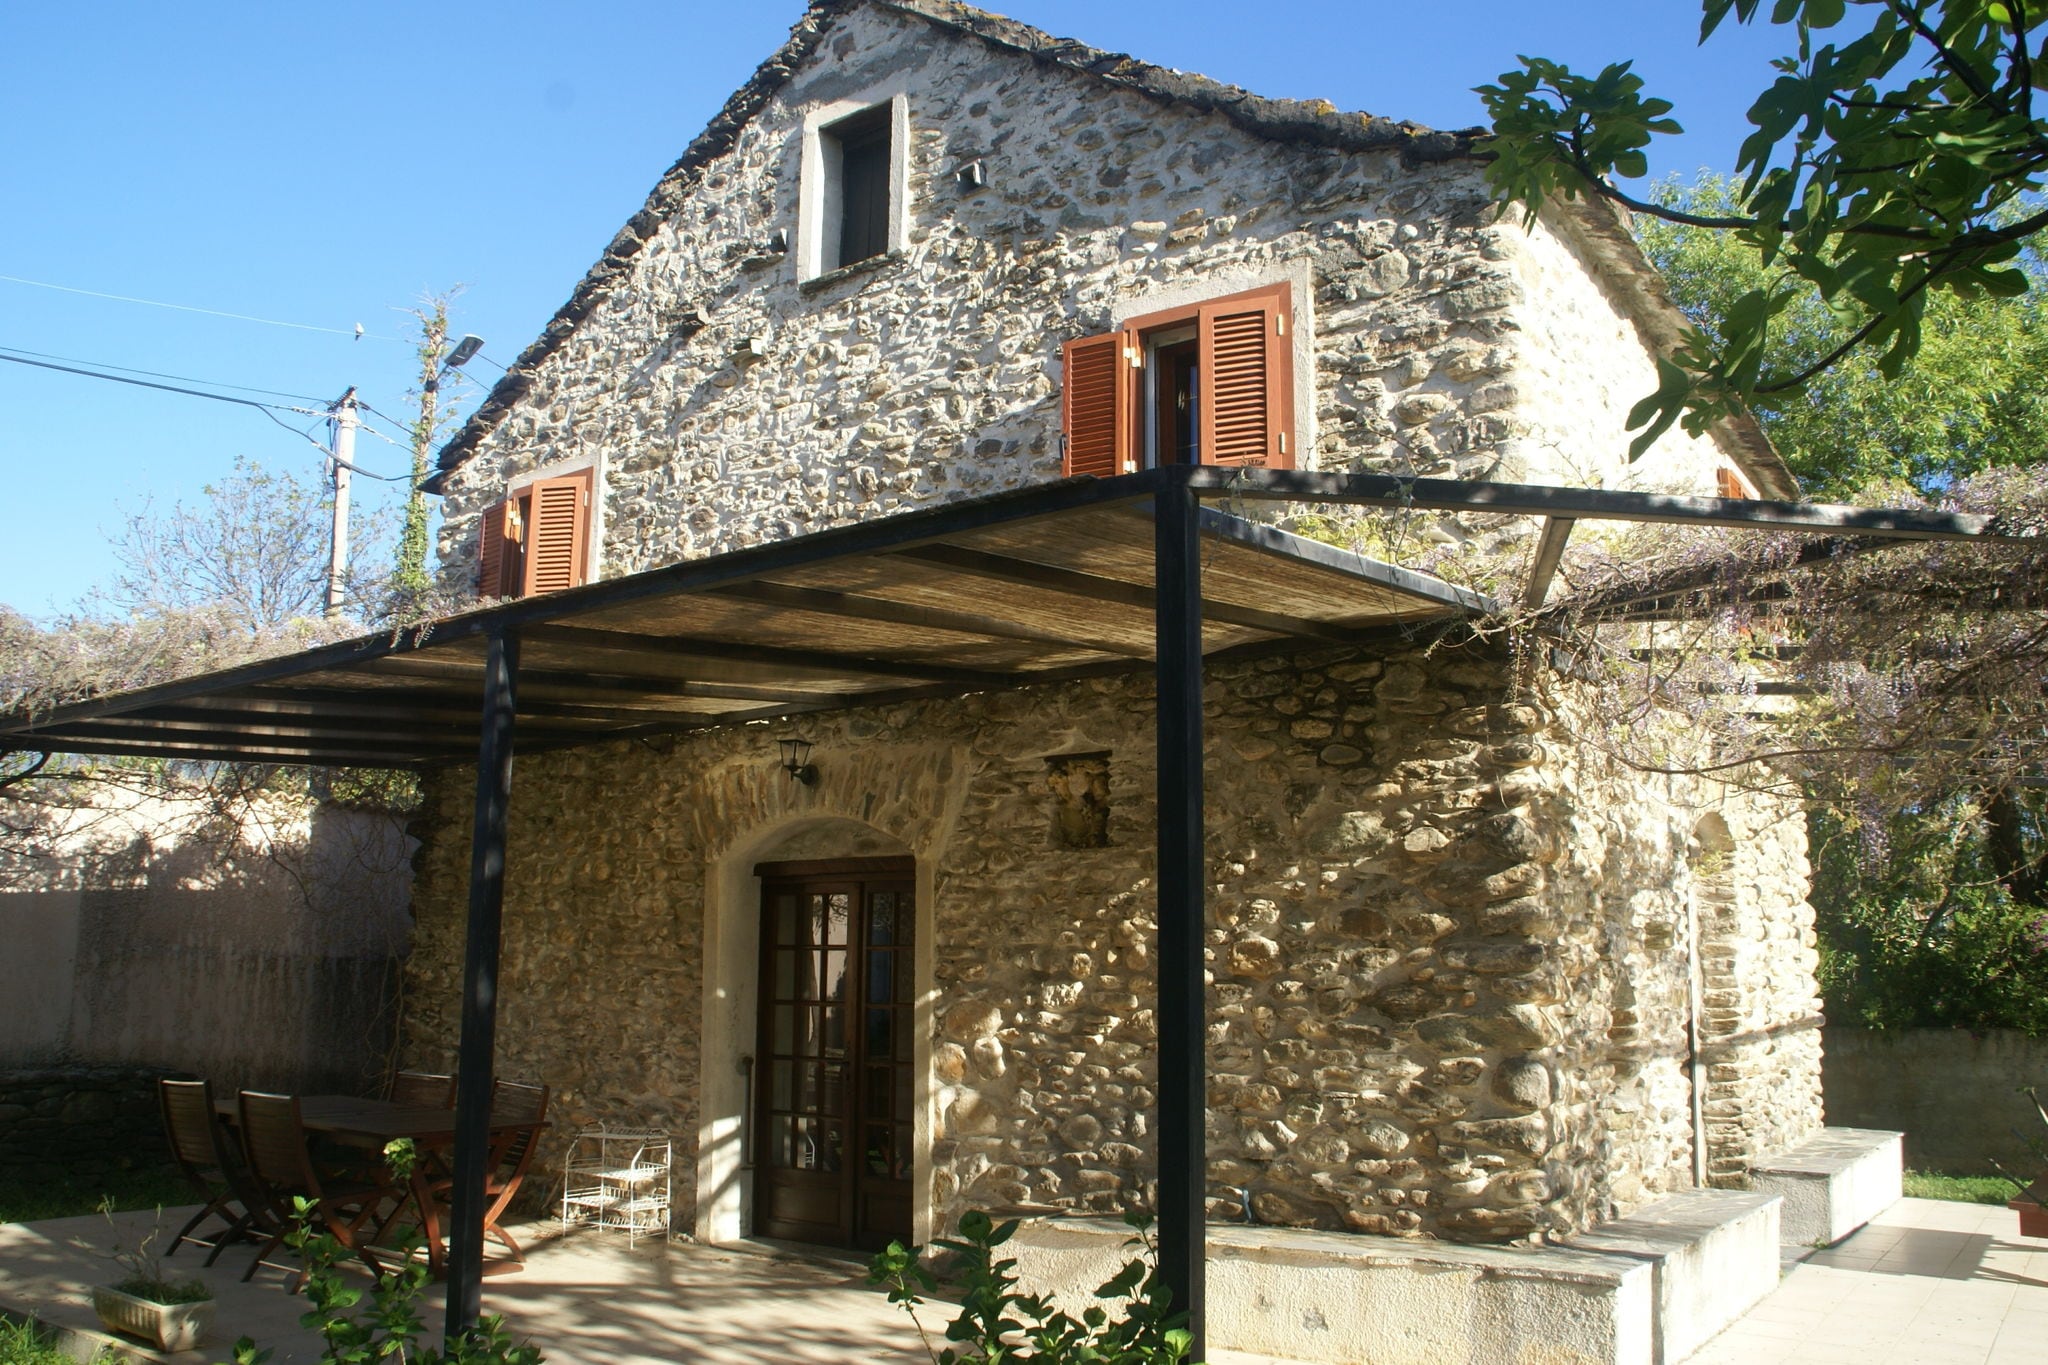 Fully restored house from 1816, swimmingpool, Corsica.